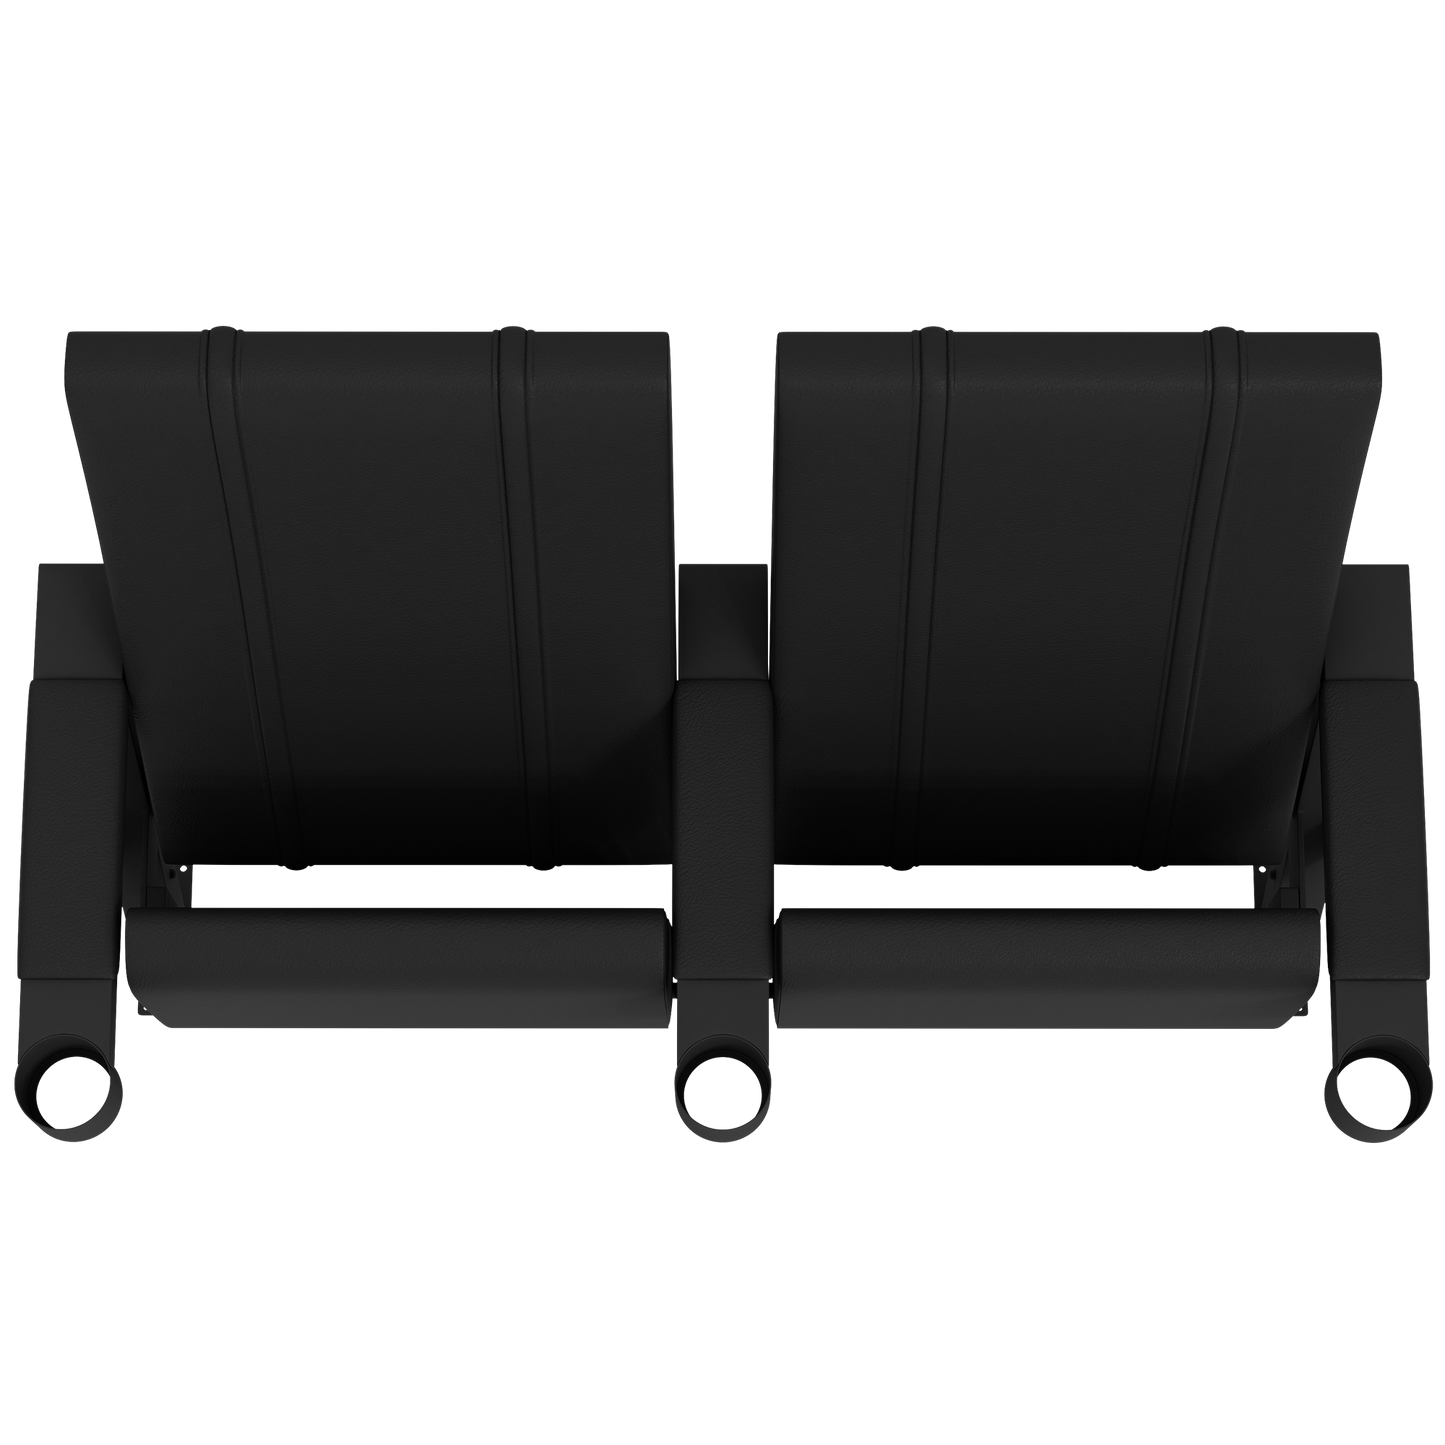 SuiteMax 3.5 VIP Seats with Los Angeles Lakers 2024 Playoffs Logo